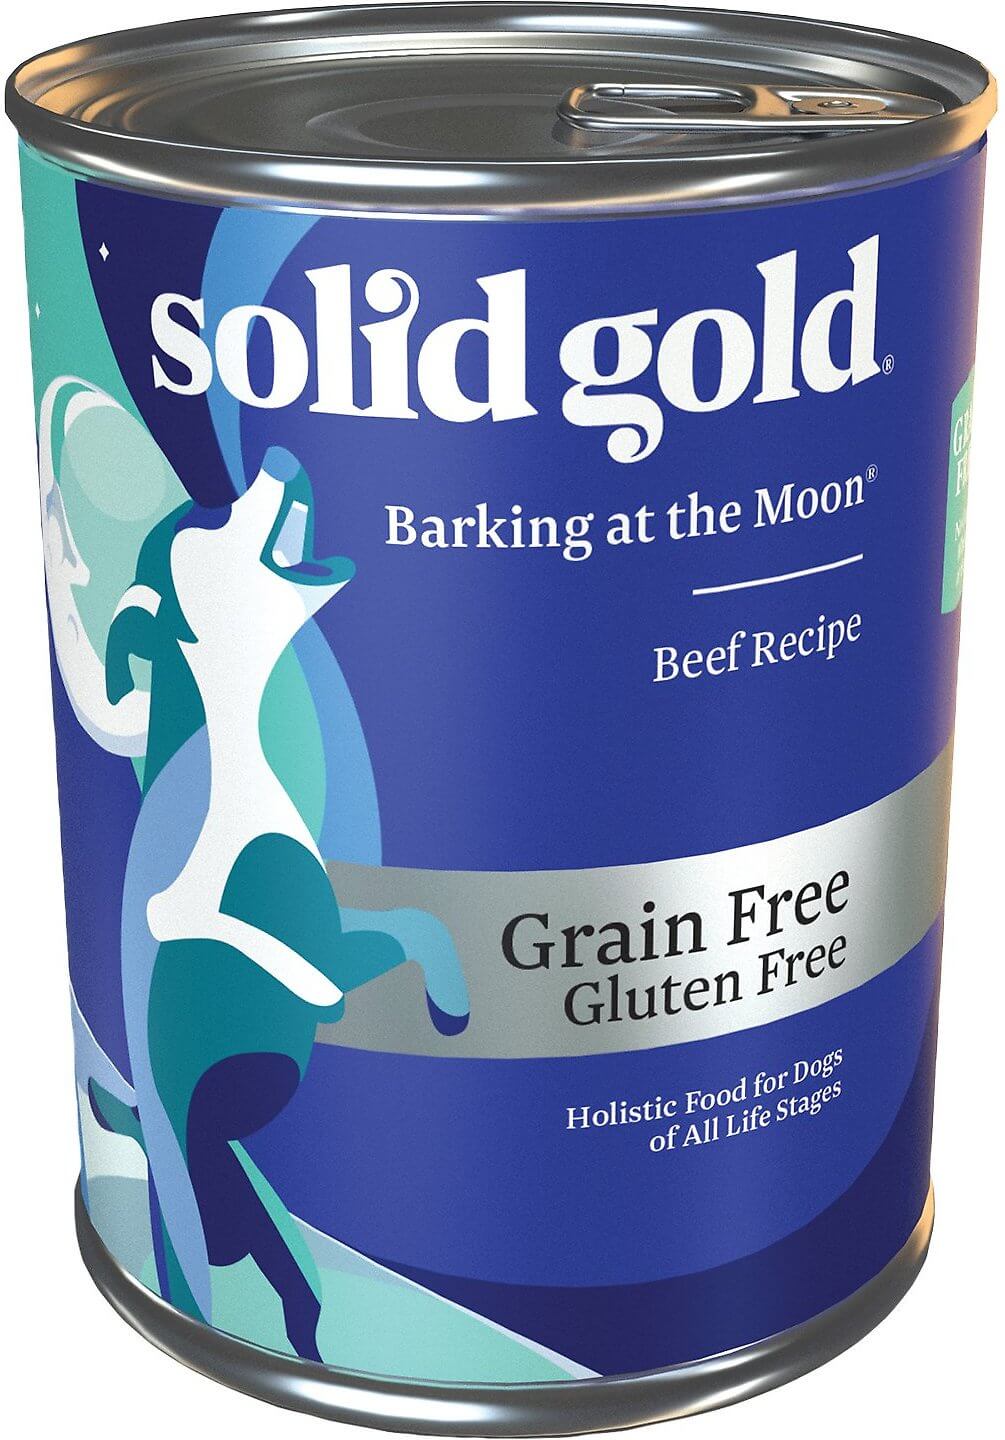 Solid Gold Dog Food Review (Canned)